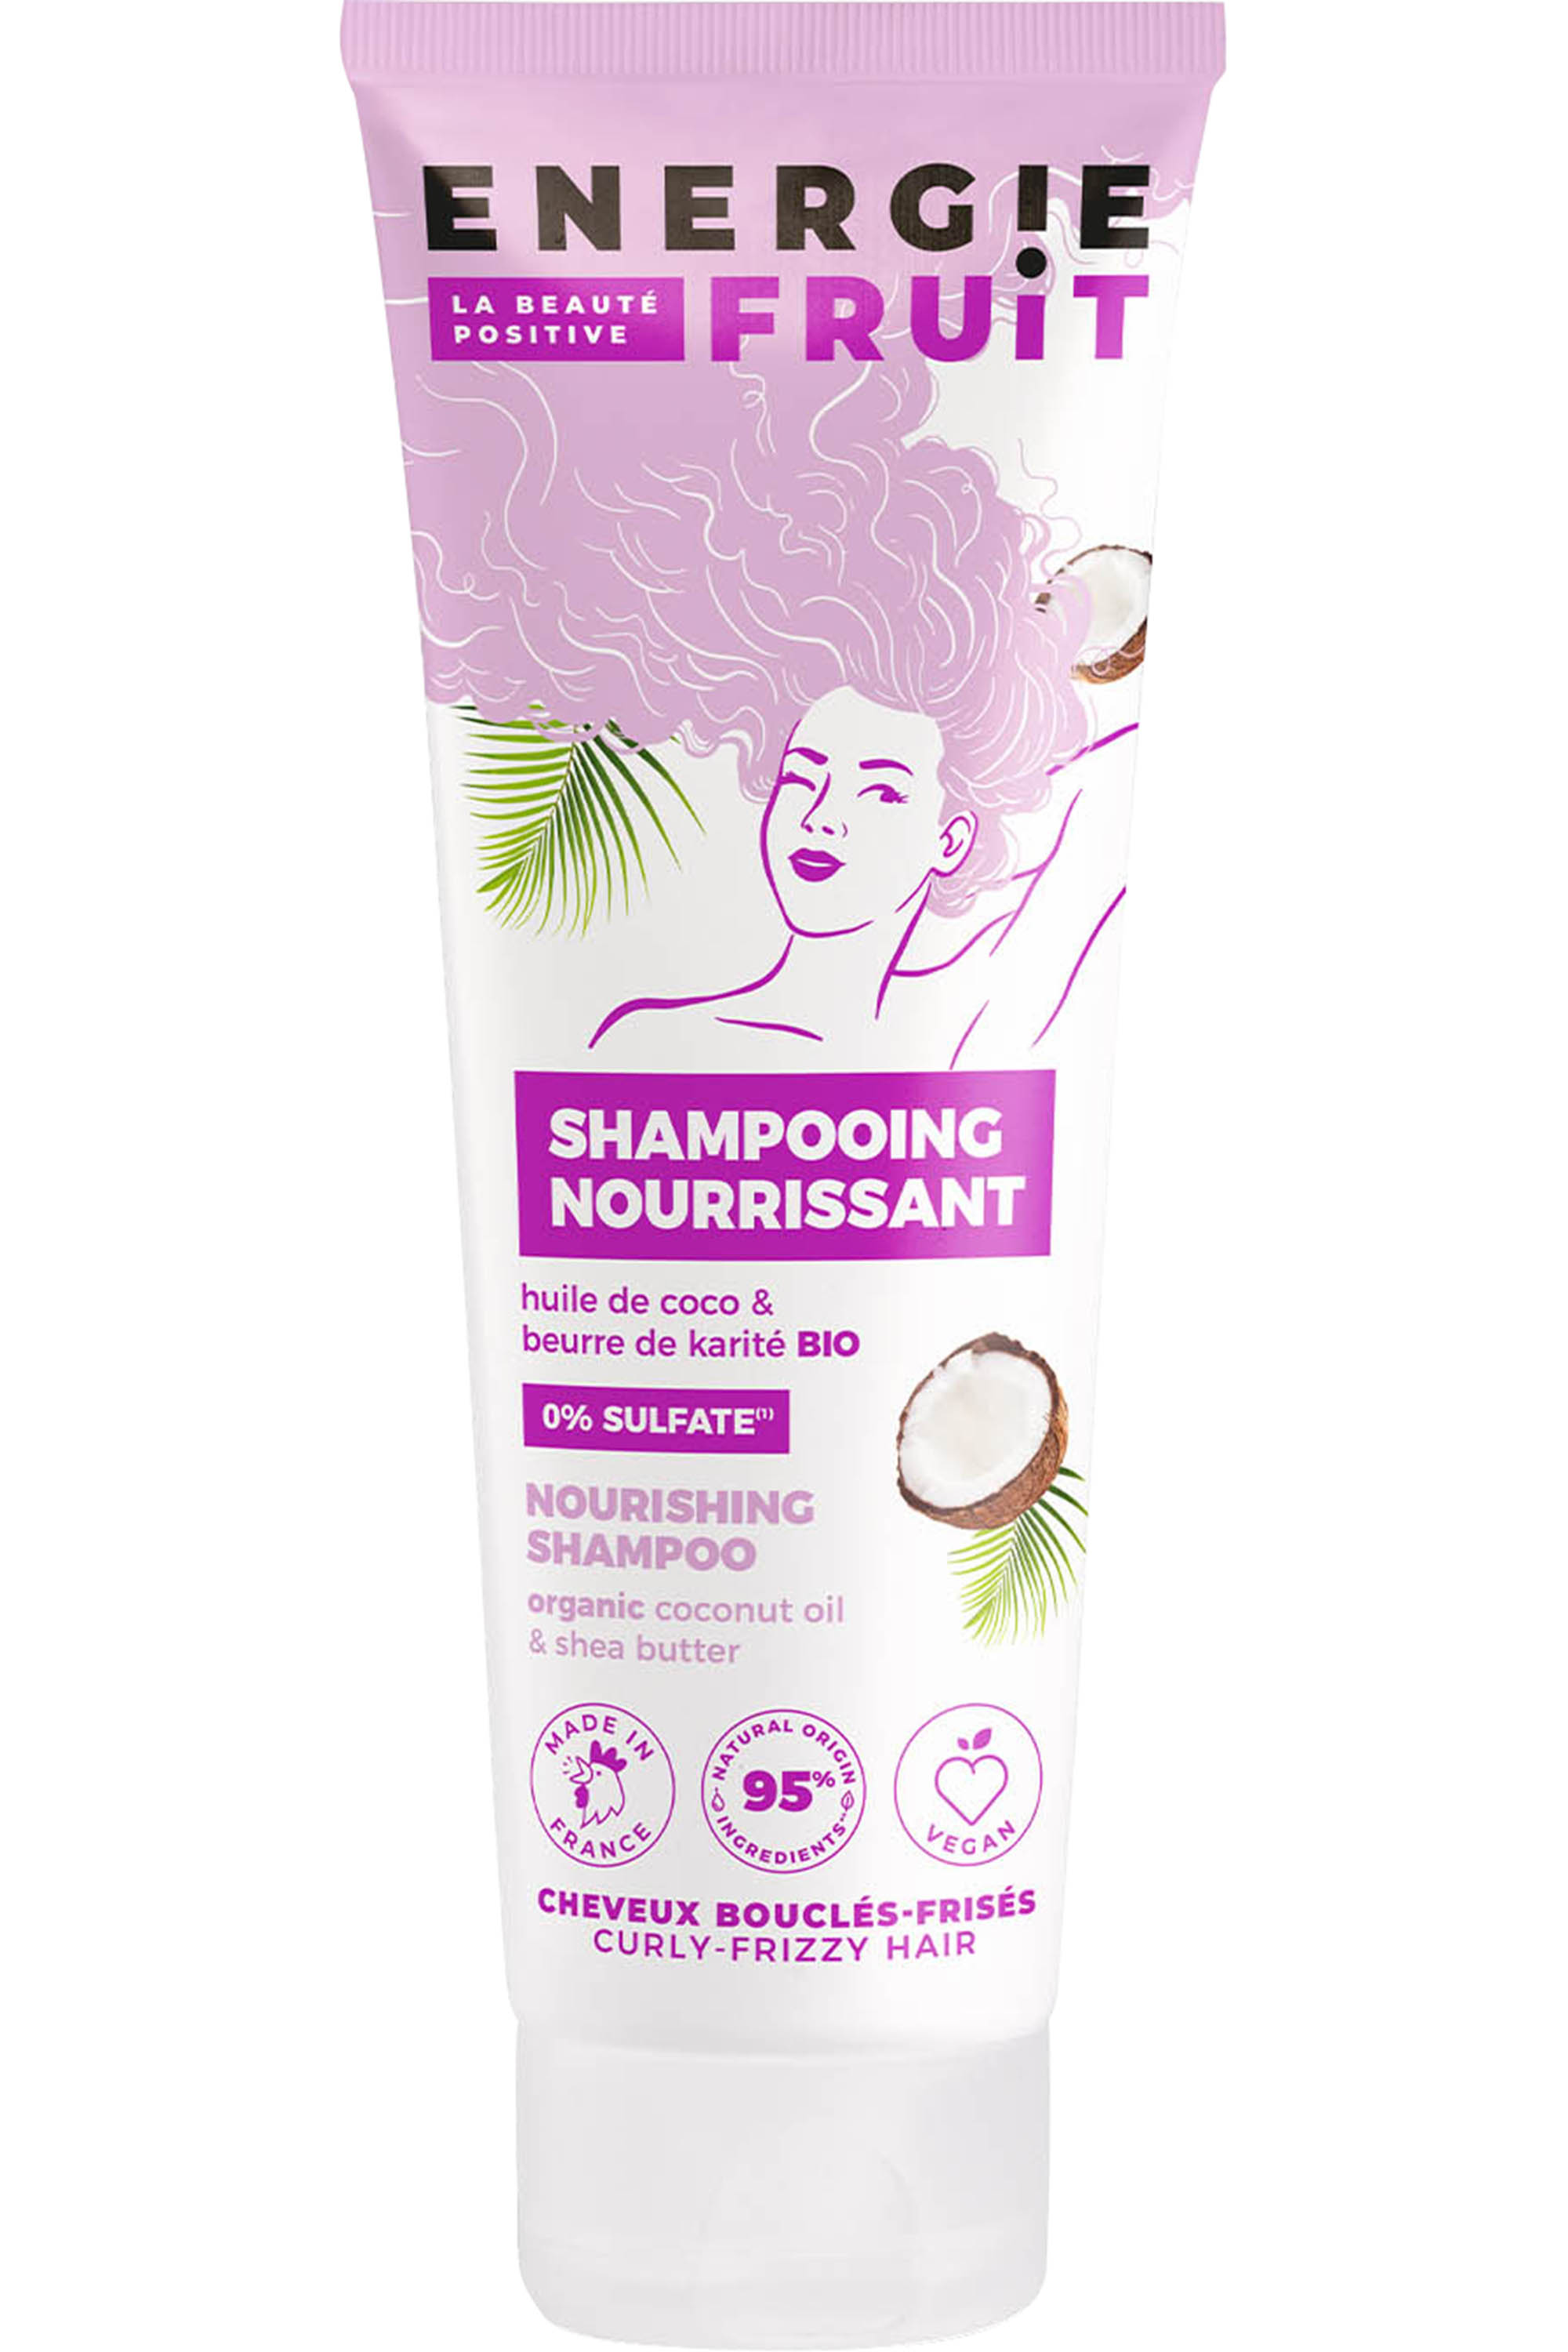 Energie Fruit - Shampoing soin – Nutrition & Définition - Hair'itageBox